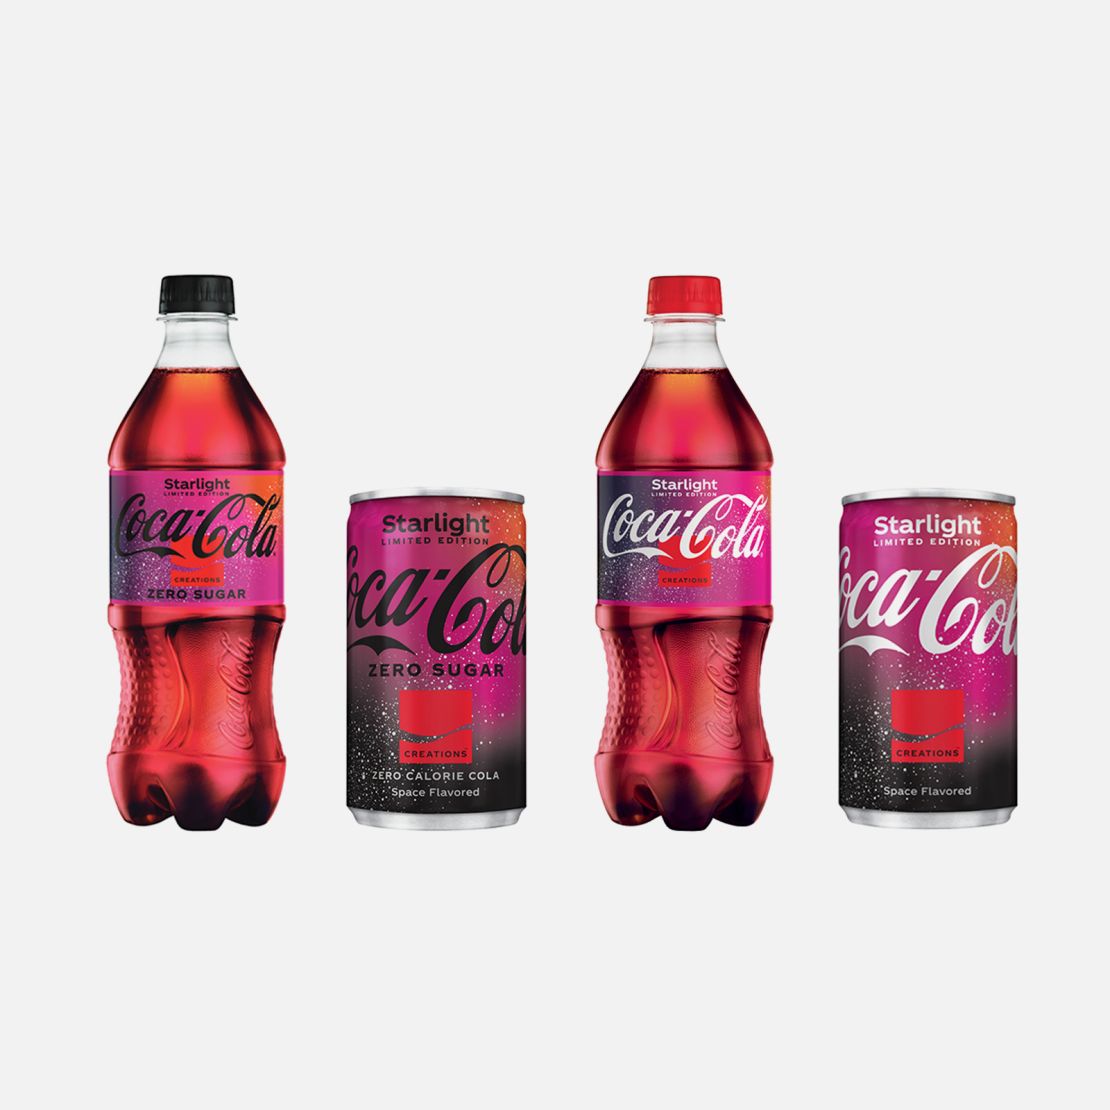 Coca-Cola introduces a first-of-its-kind flavor